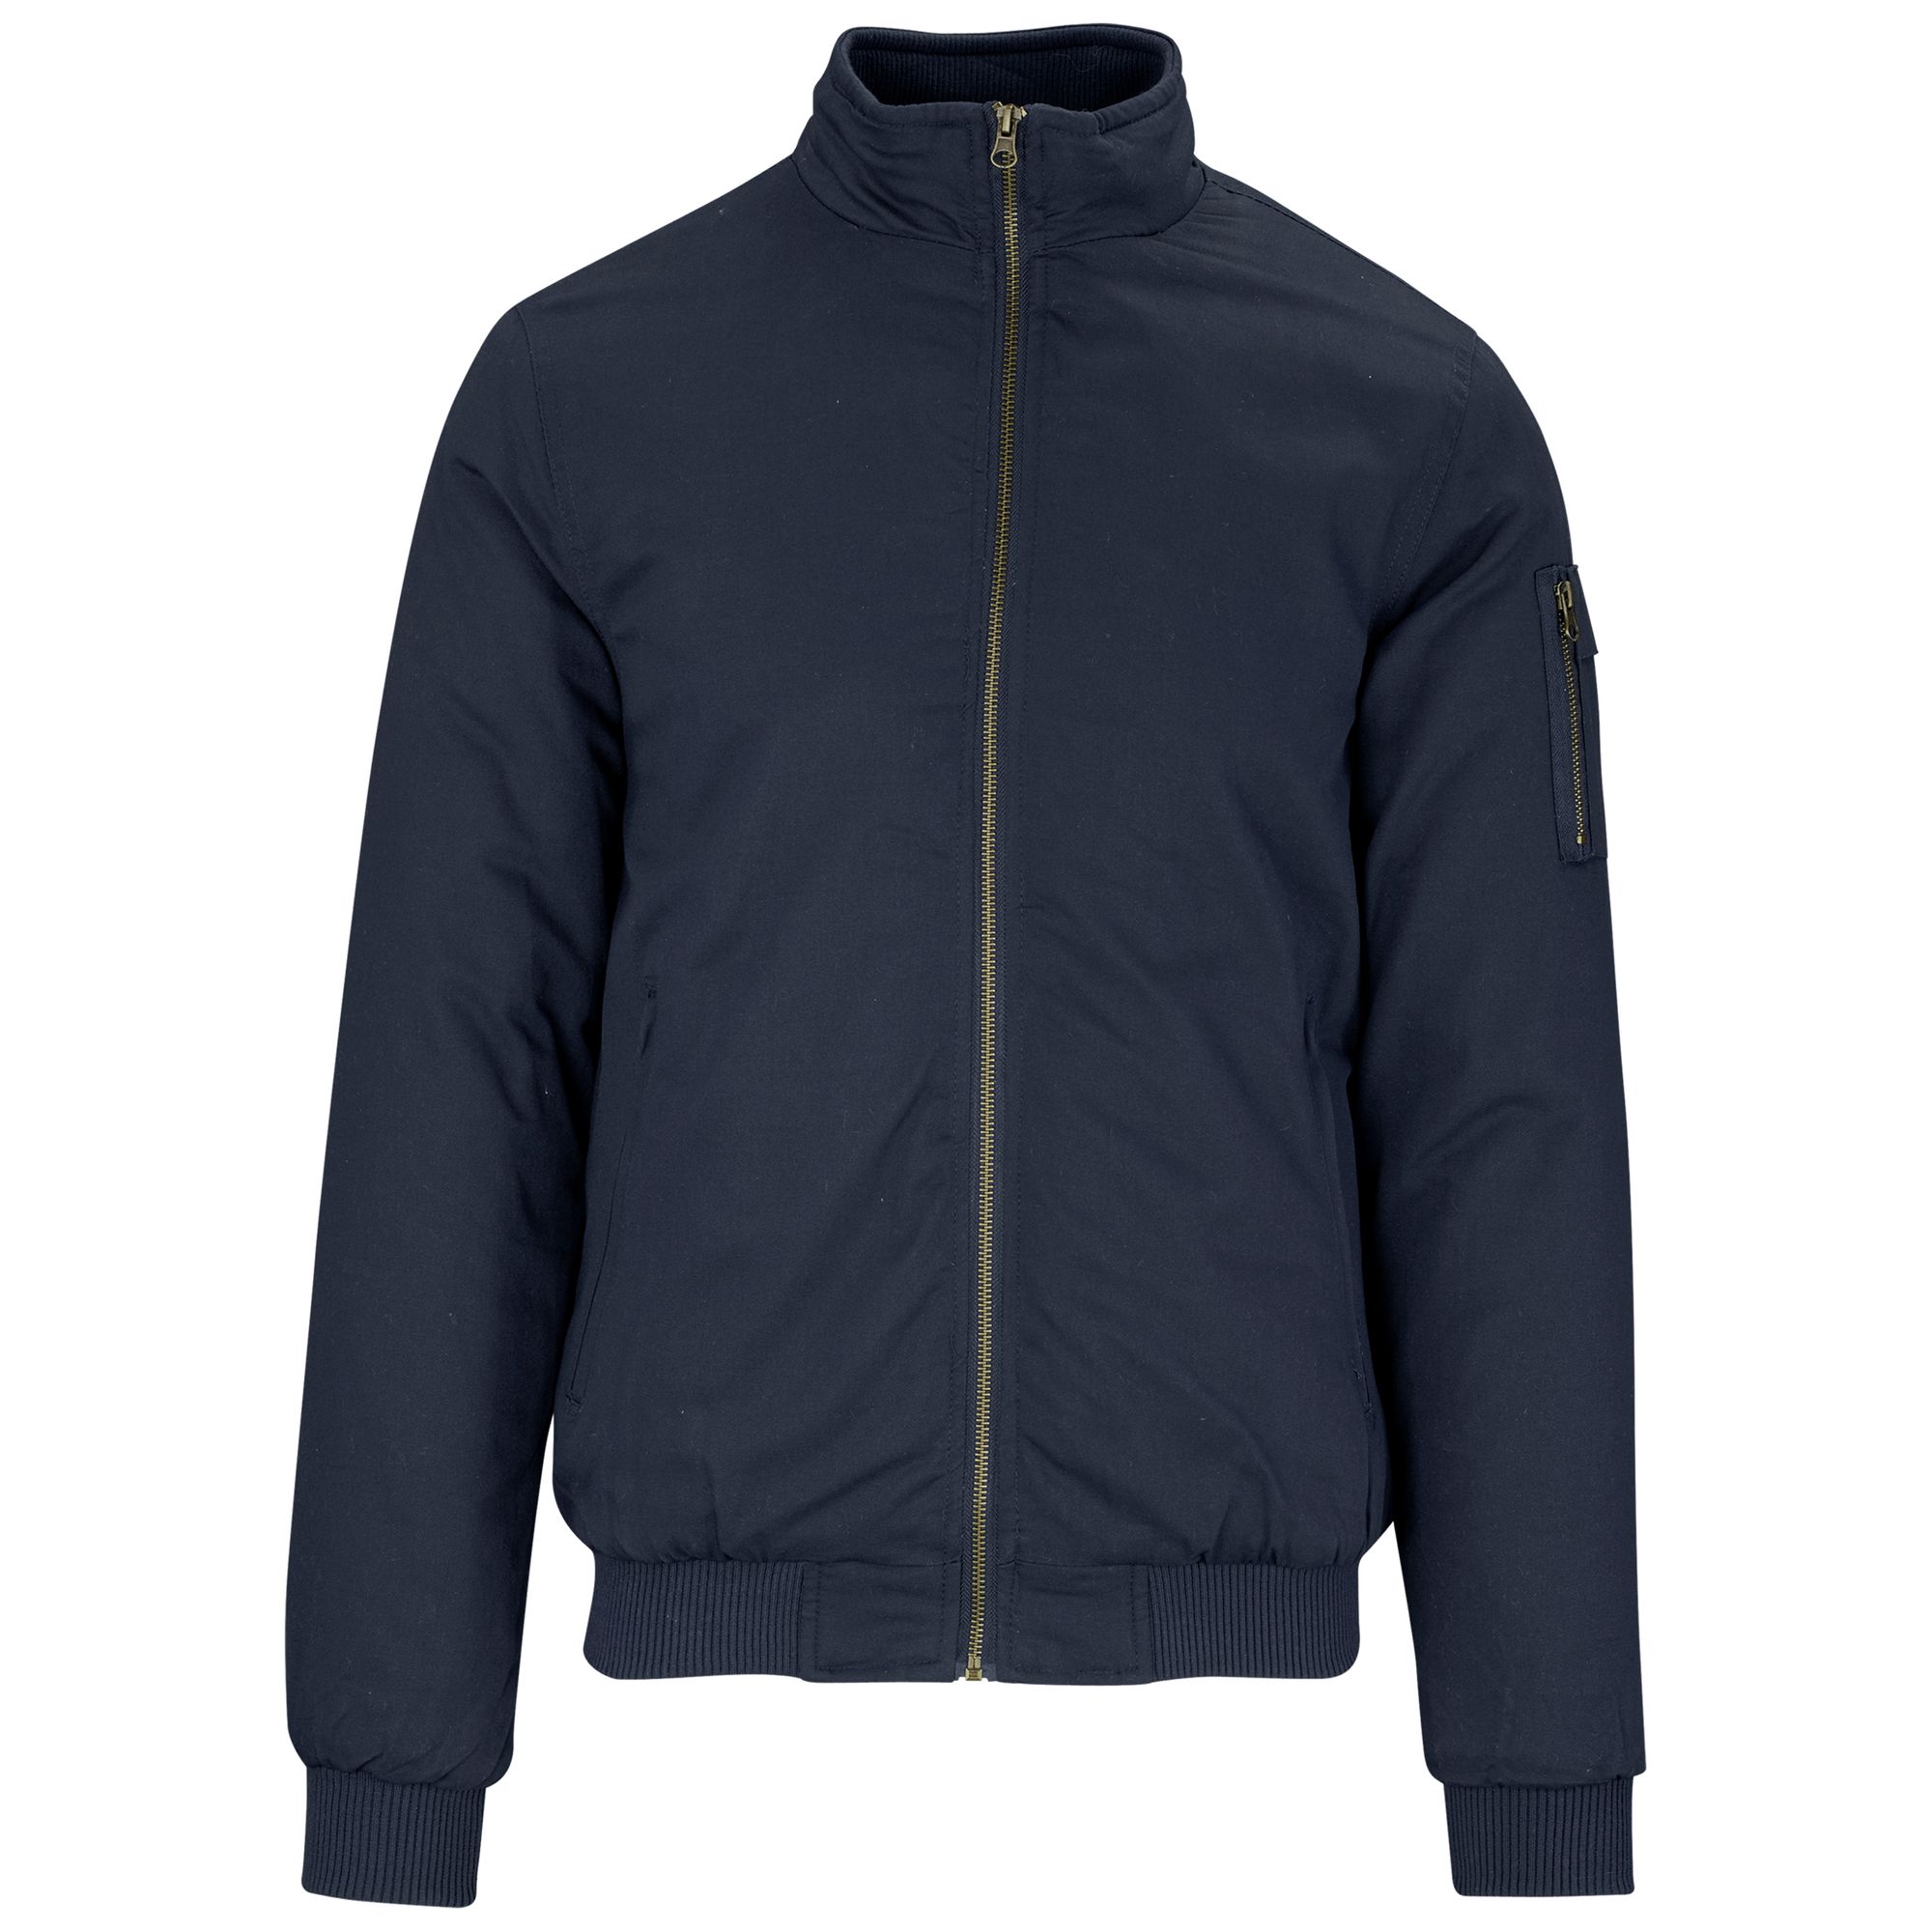 mens rover jacket - navy only | Brand Boys